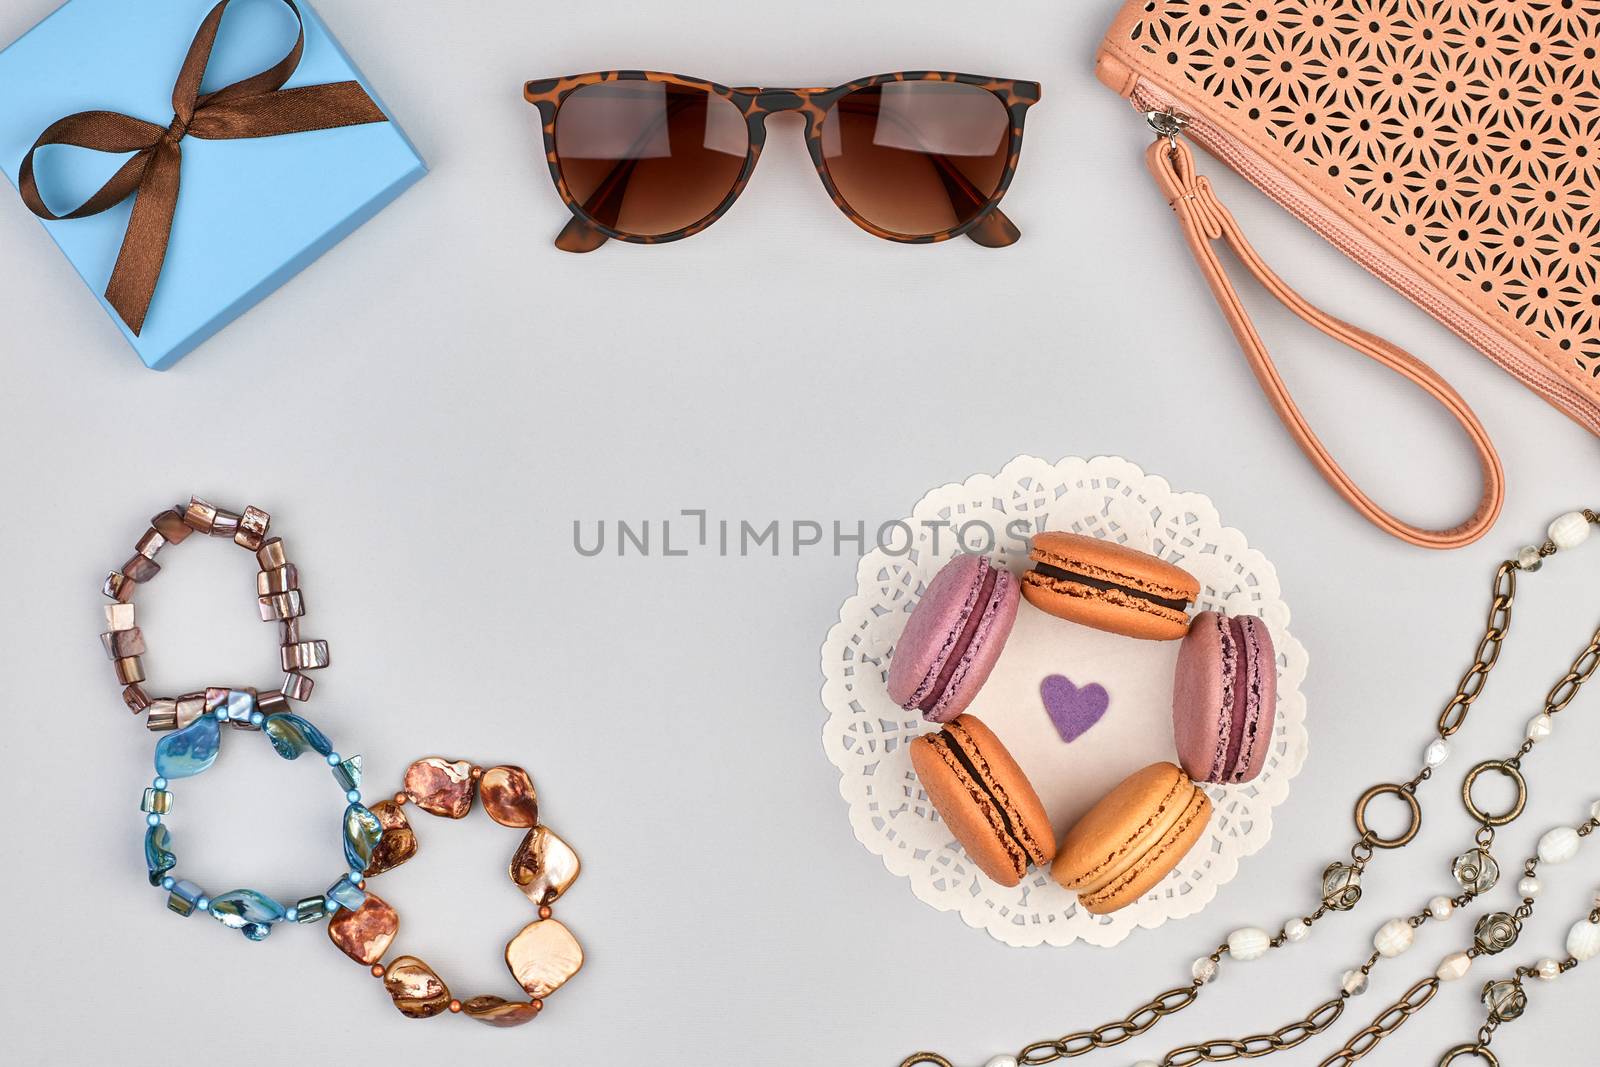 Overhead outfit Fashion clothes set, macarons french dessert, accessories. Glamor creative, handbag clutch sunglasses gift box, necklace, bracelet. Unusual modern party essentials.Top view,background